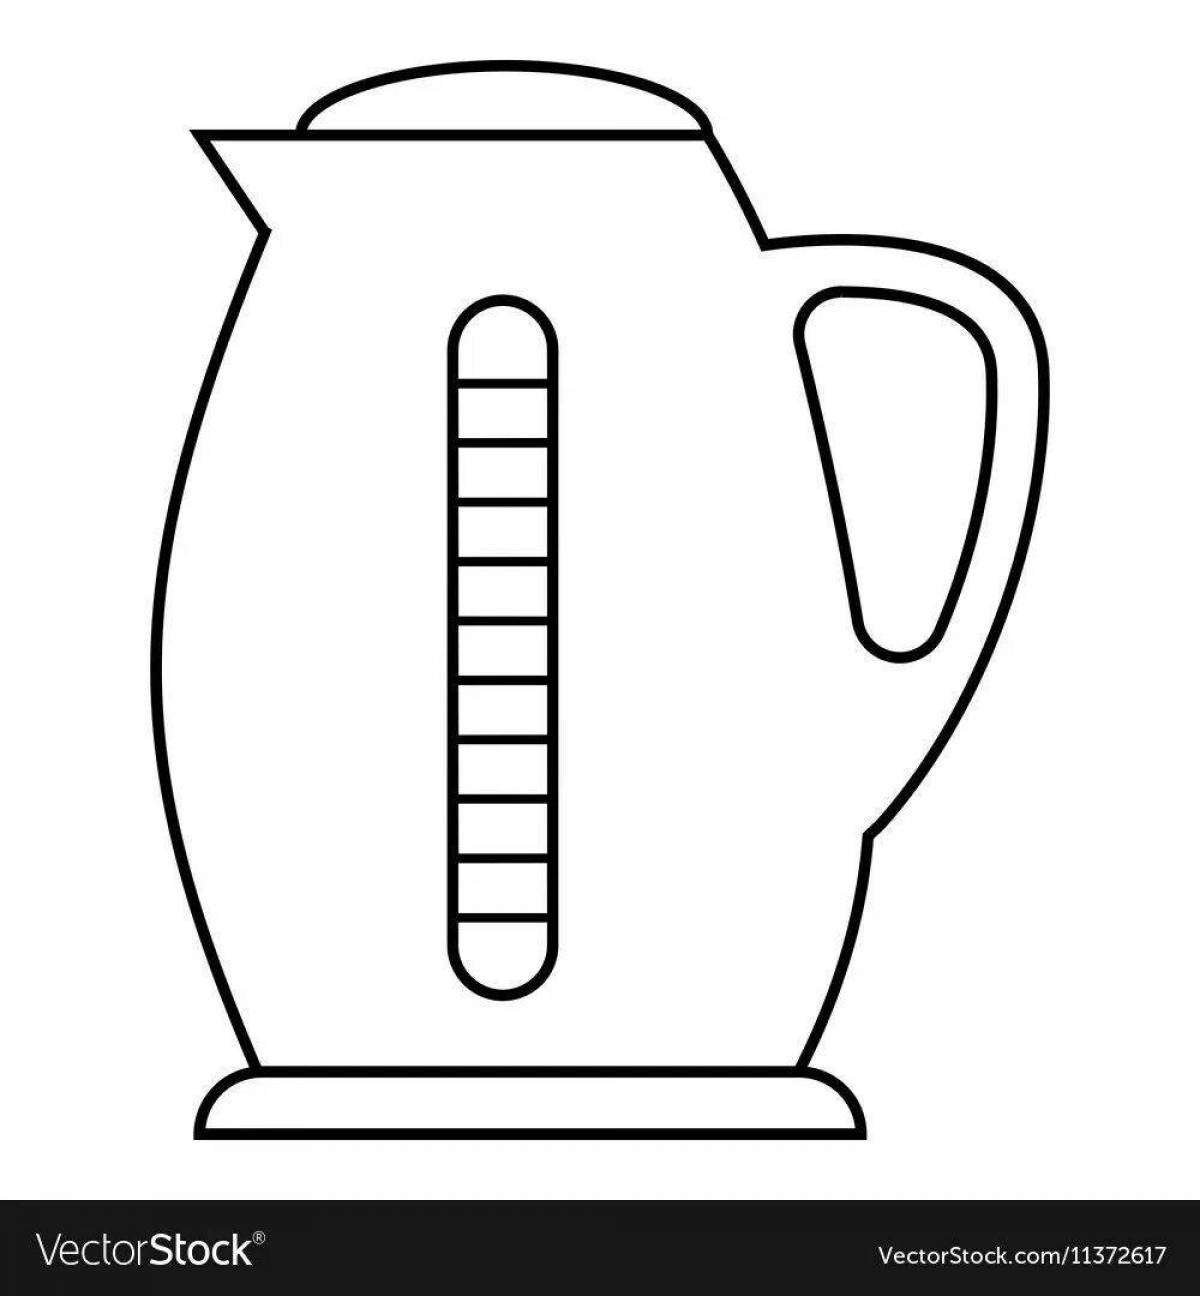 Coloring electric kettle for children